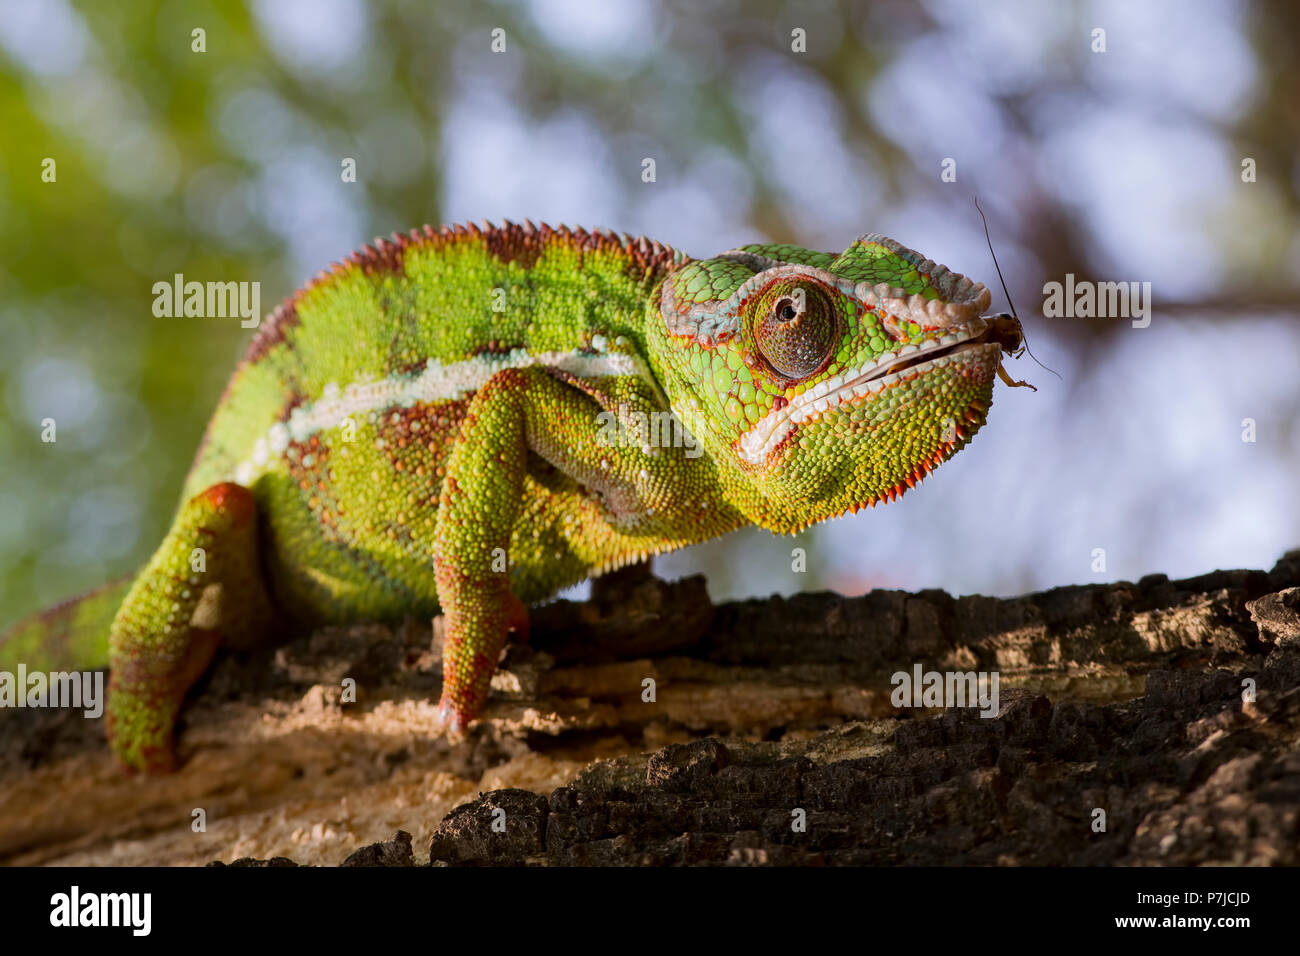 Chameleon panther on branch Stock Photo